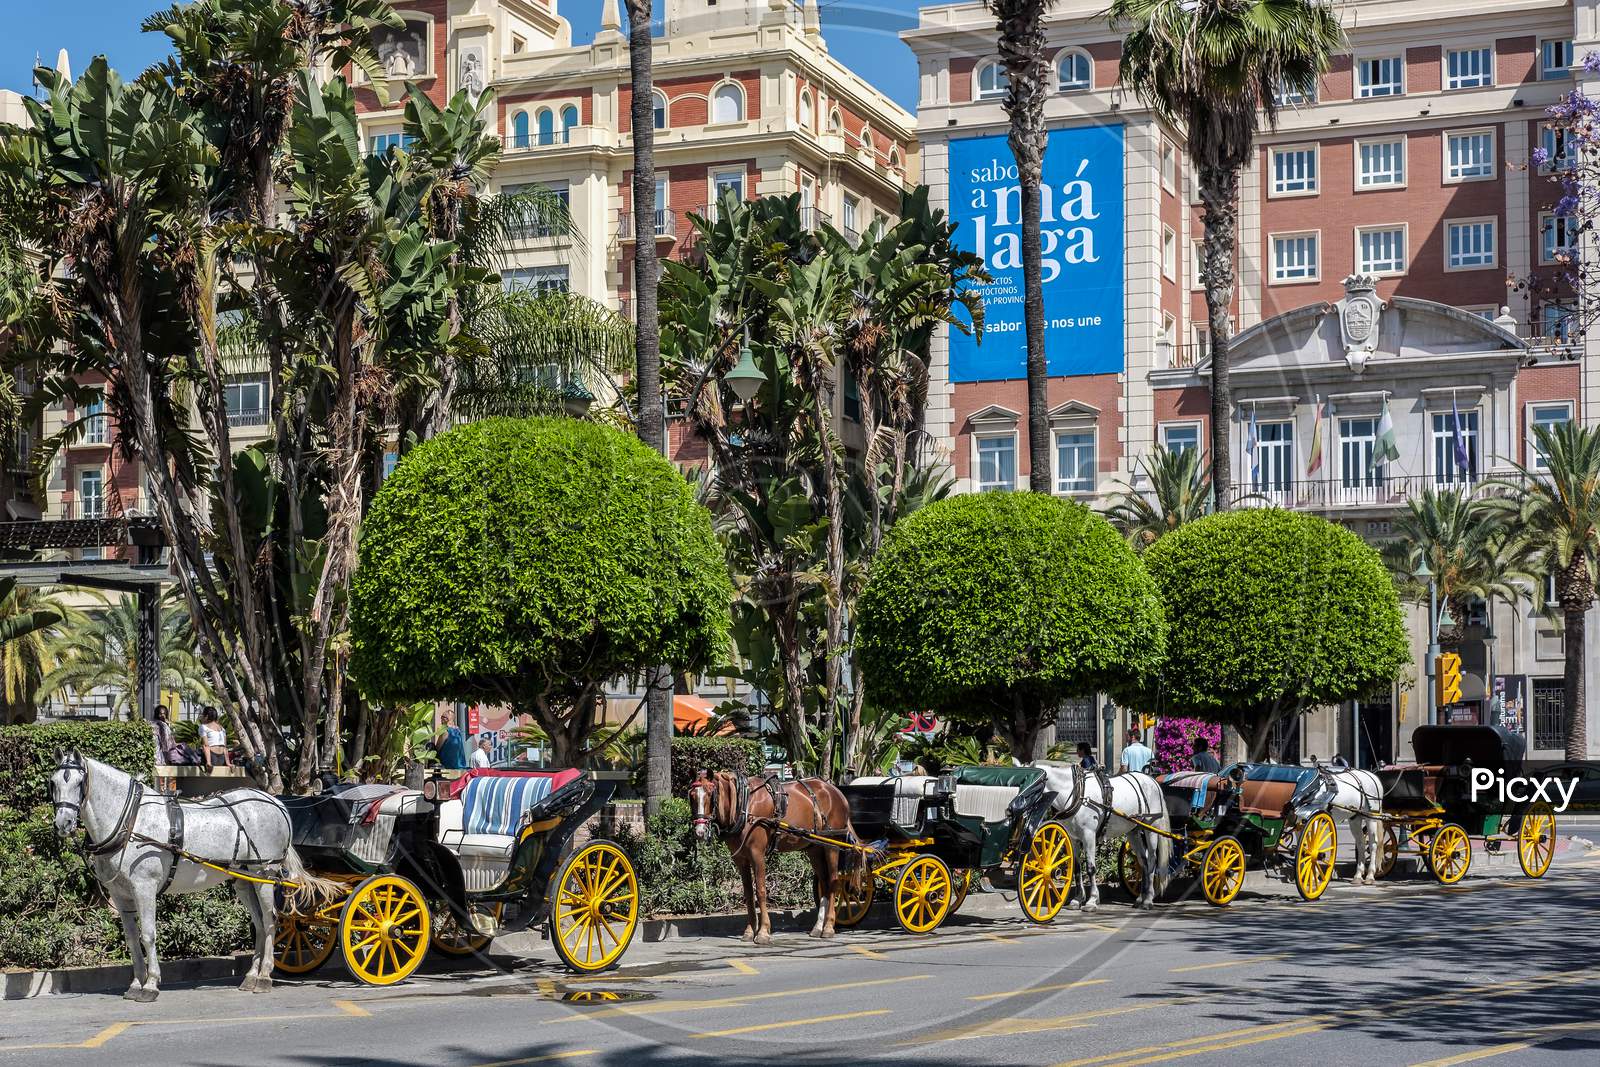 Traditional Horses And Carriages Waiting For Customers In Malaga